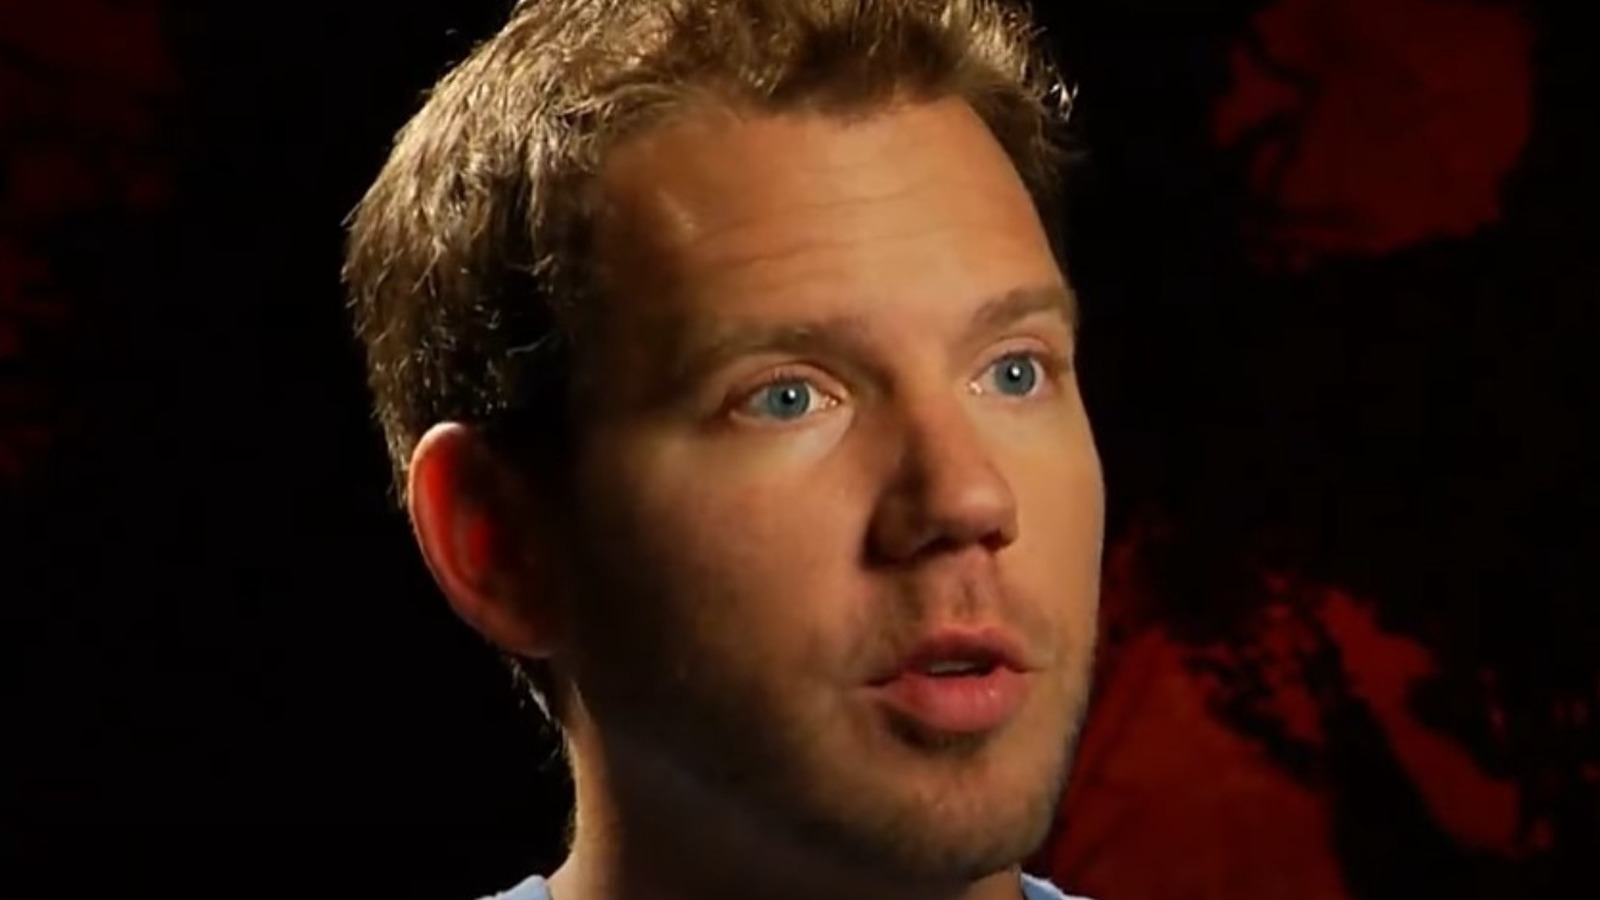 Epic Didn't Really Know What to Do With the Franchise,' Cliff Bleszinski on  the Gears of War Sale to Xbox - IGN